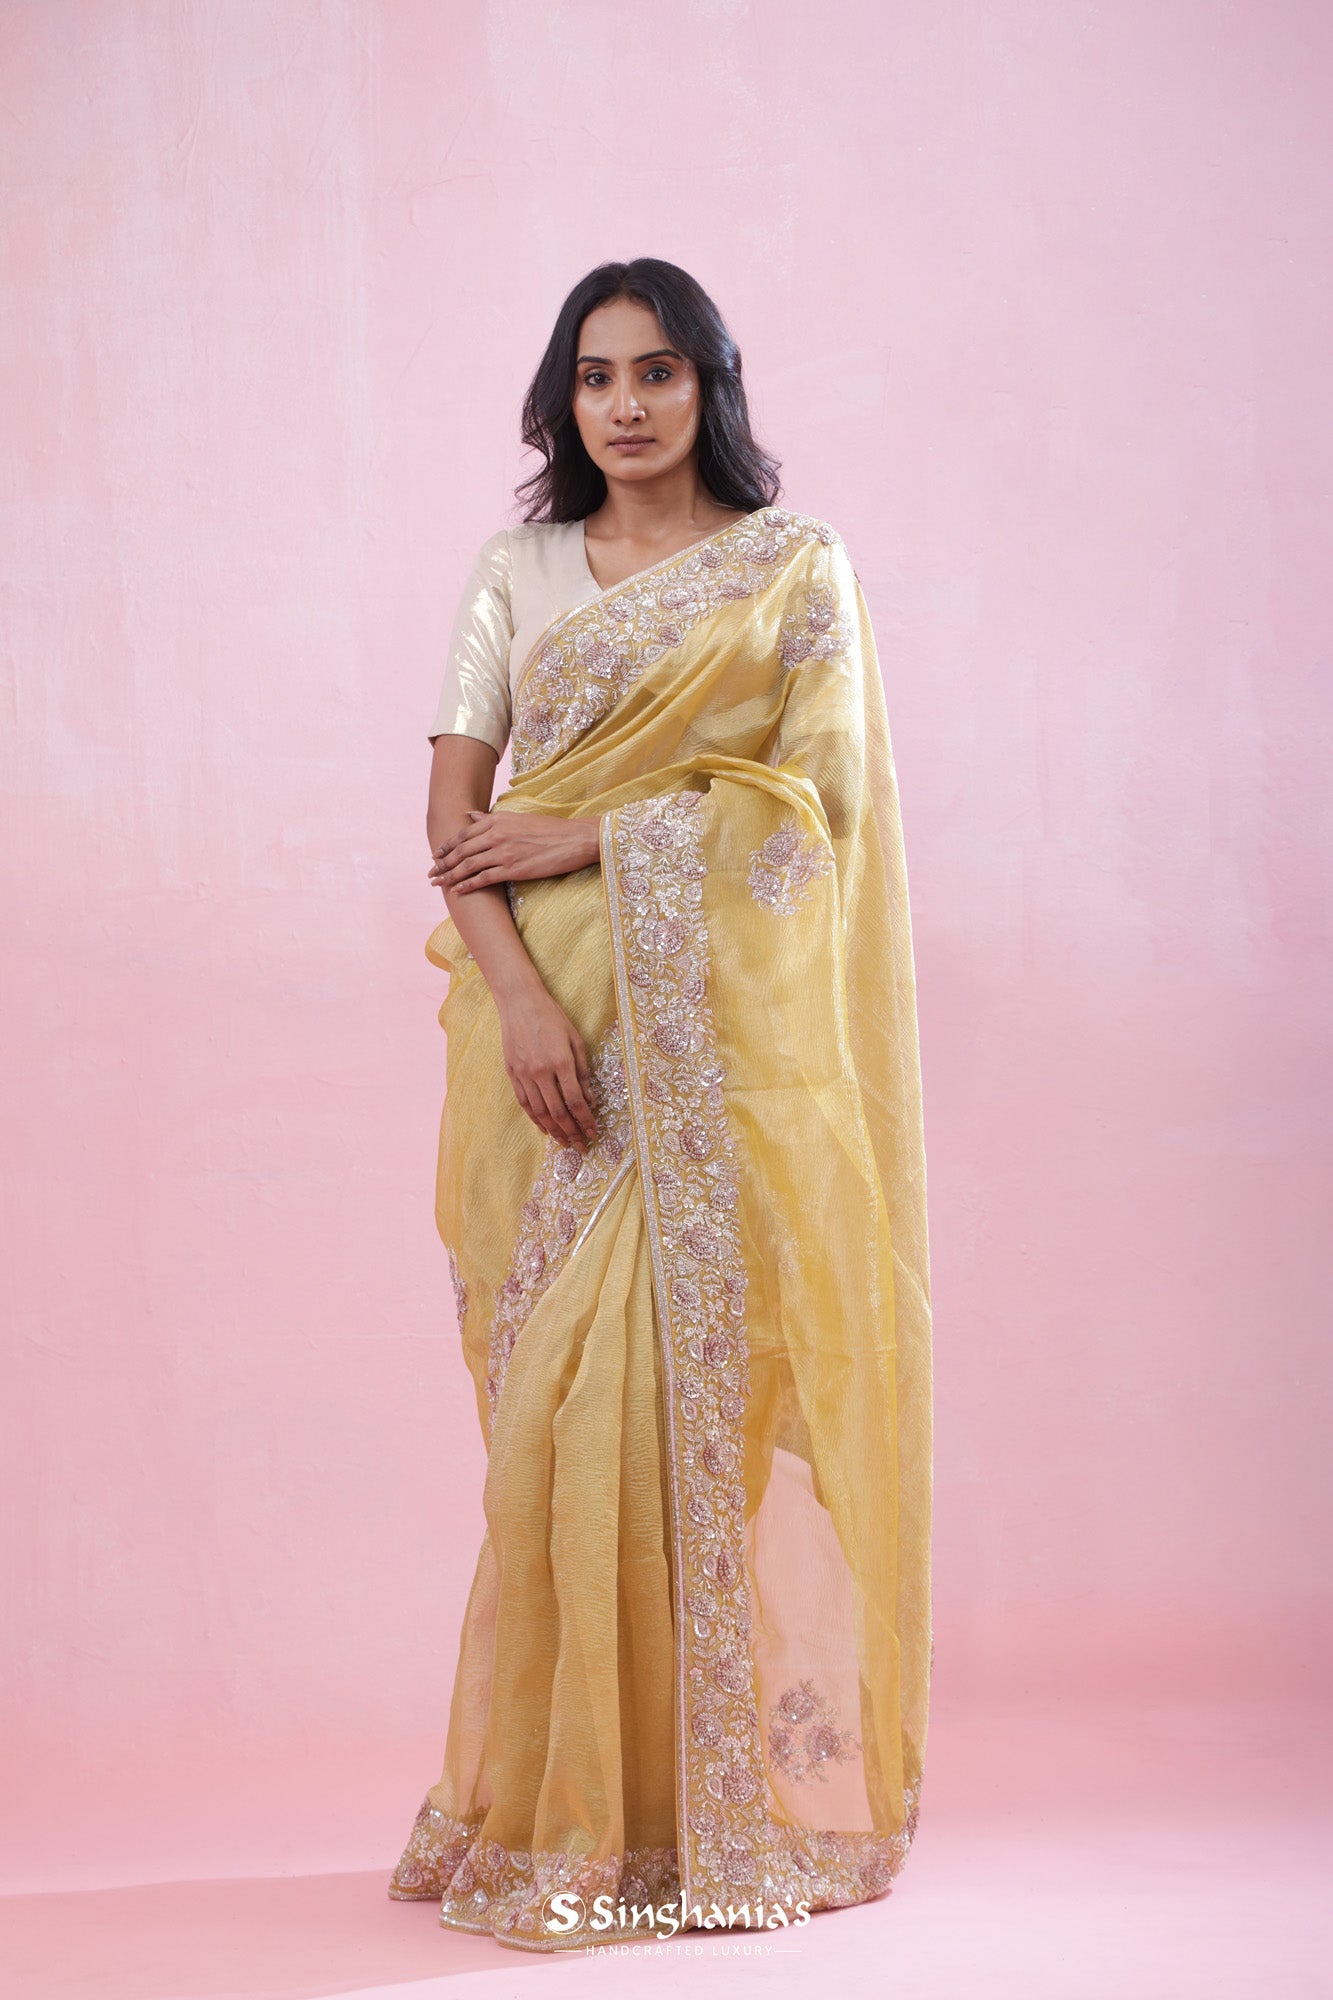 Pastel Golden Yellow Crushed Tissue Organza Saree With Hand Embroidery